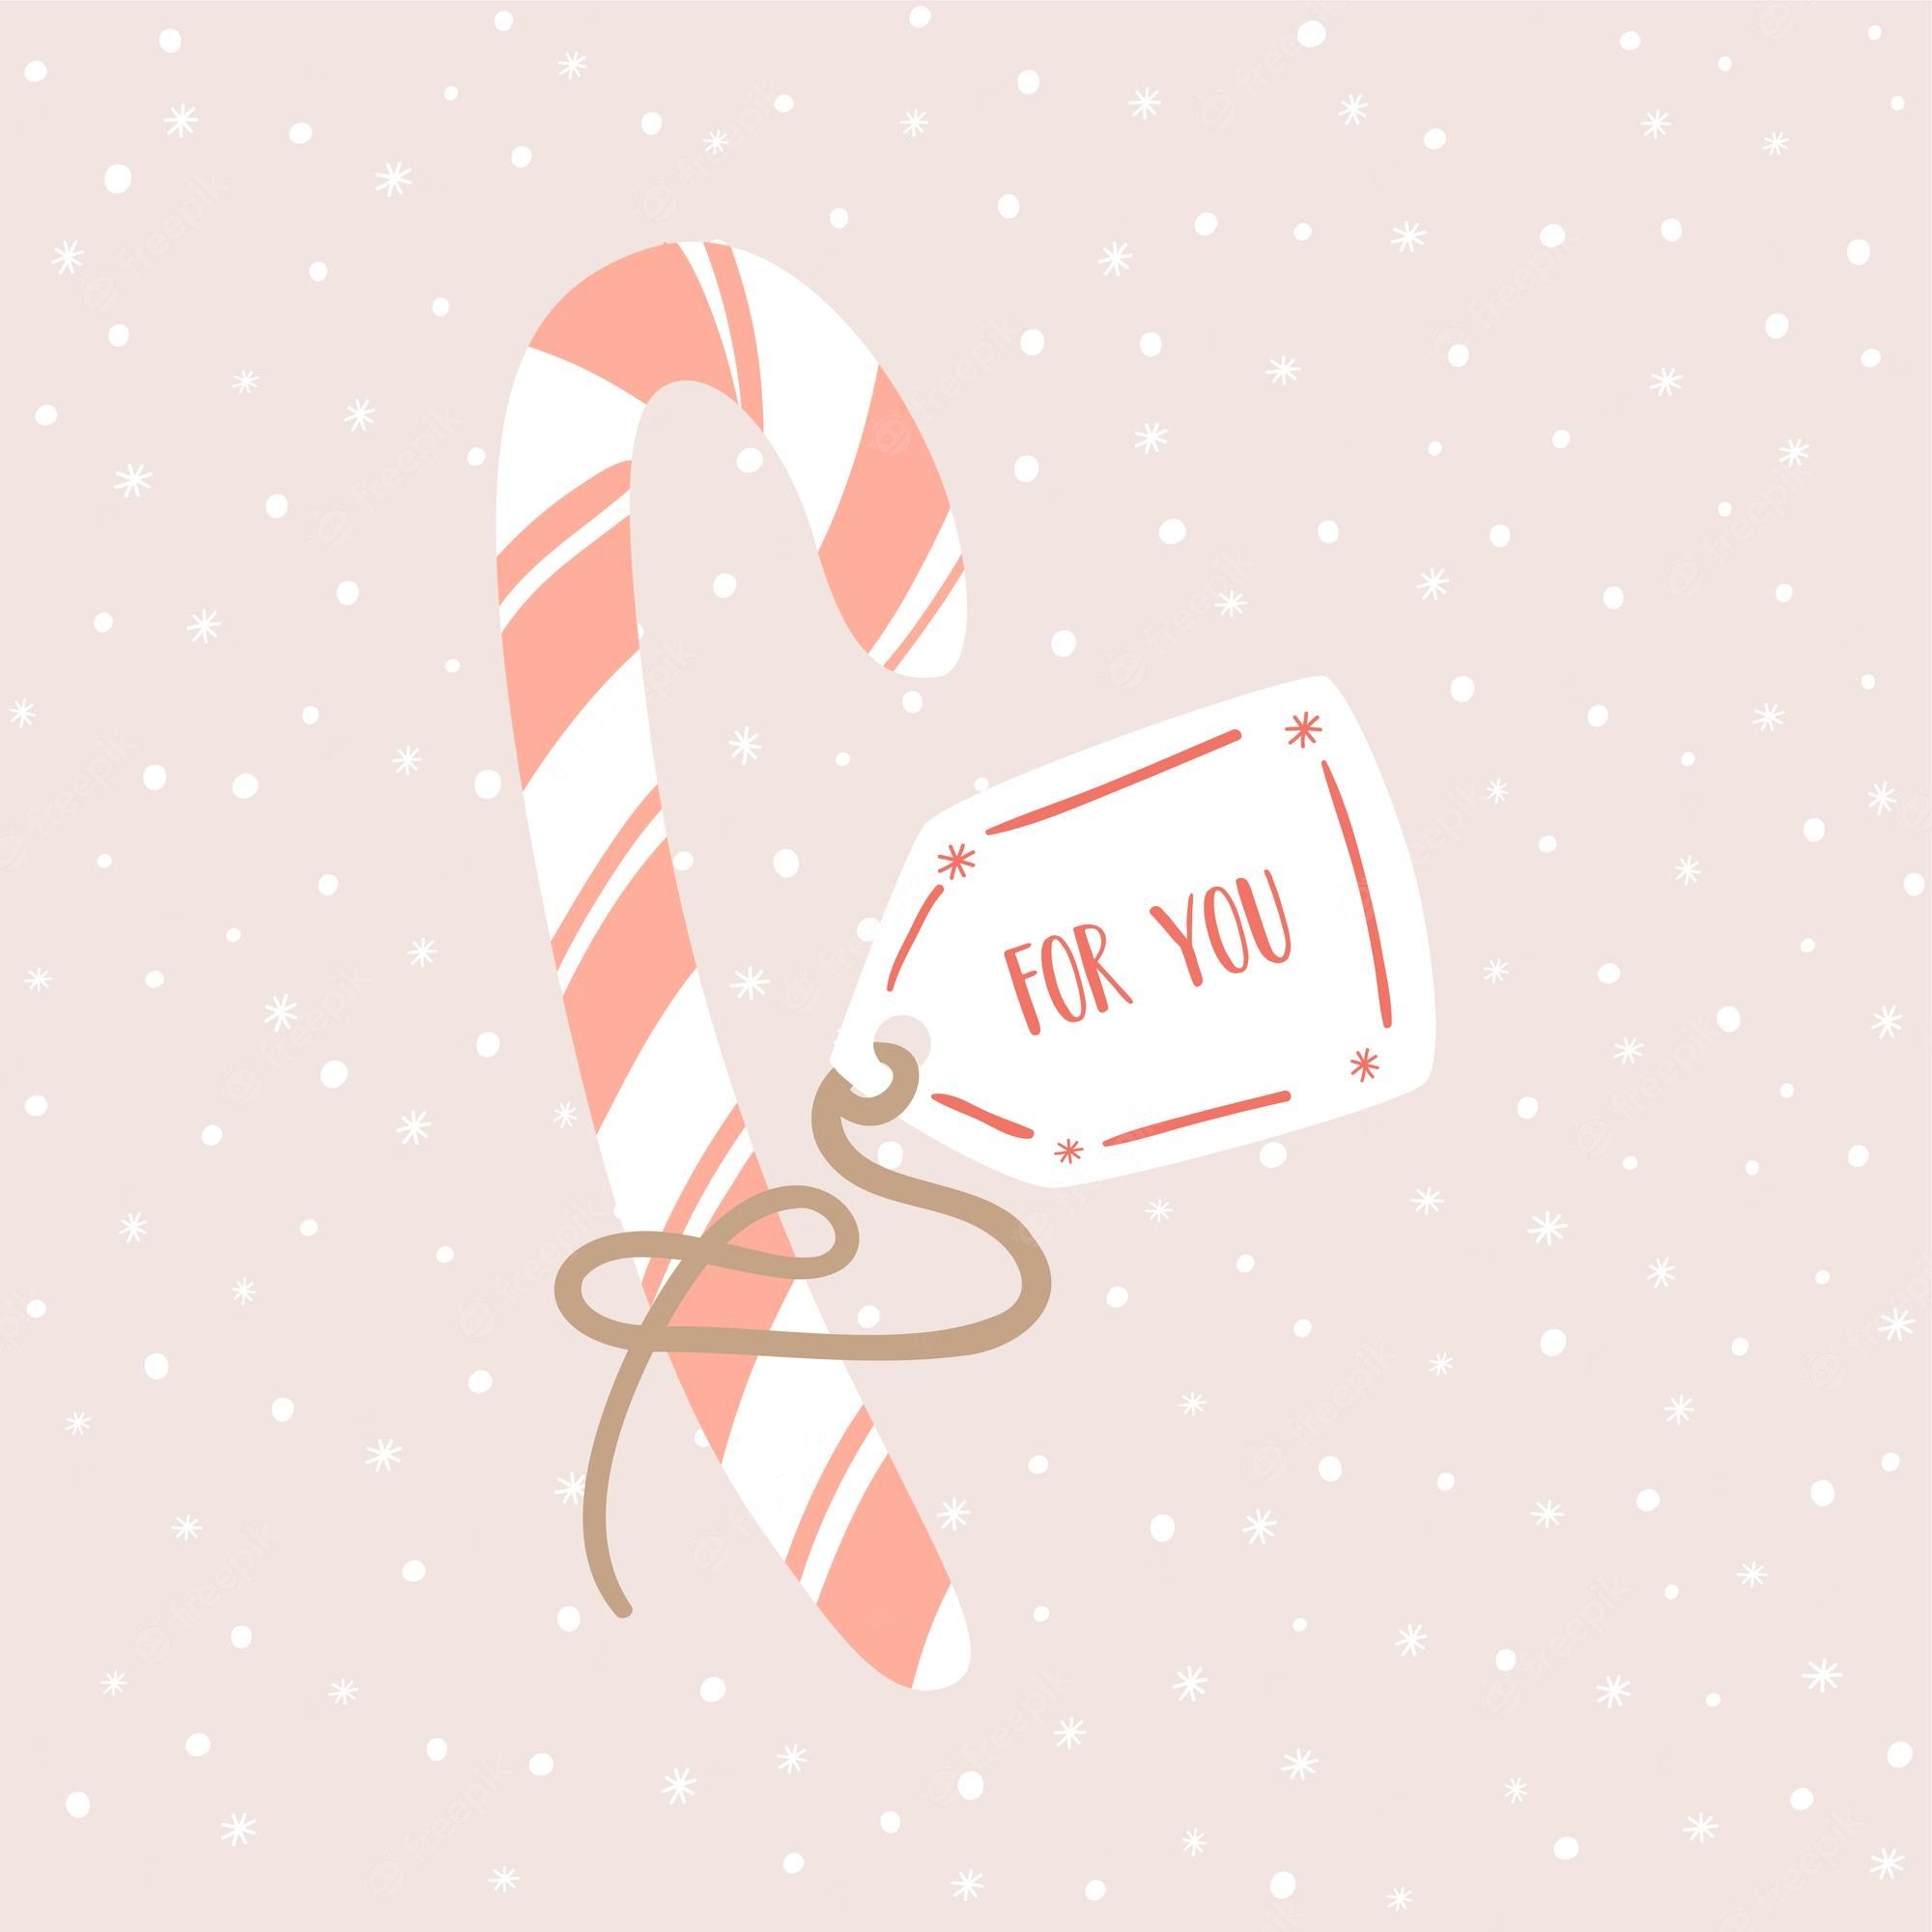 Cute Candy Cane Wallpaper Image